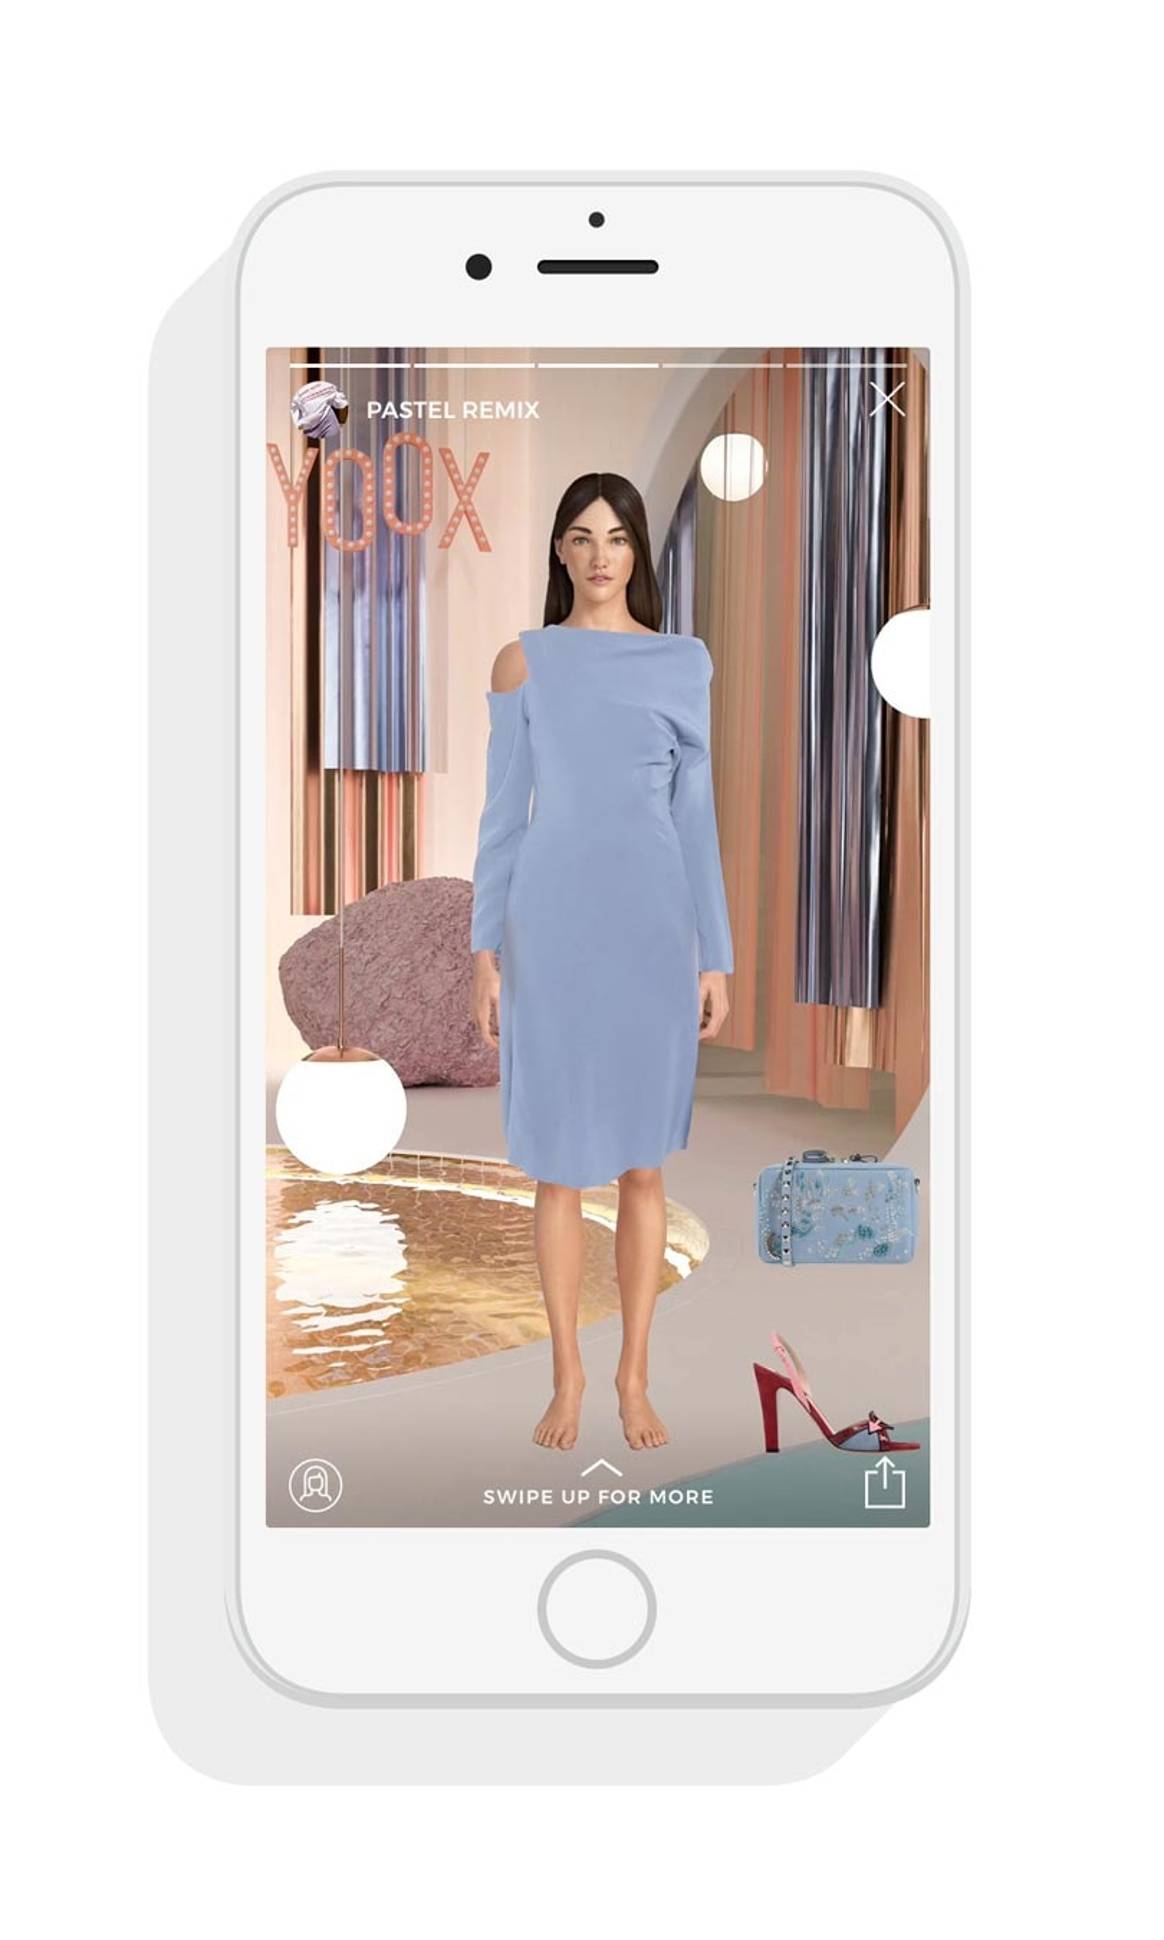 Yoox unveils AI-powered virtual styling suite